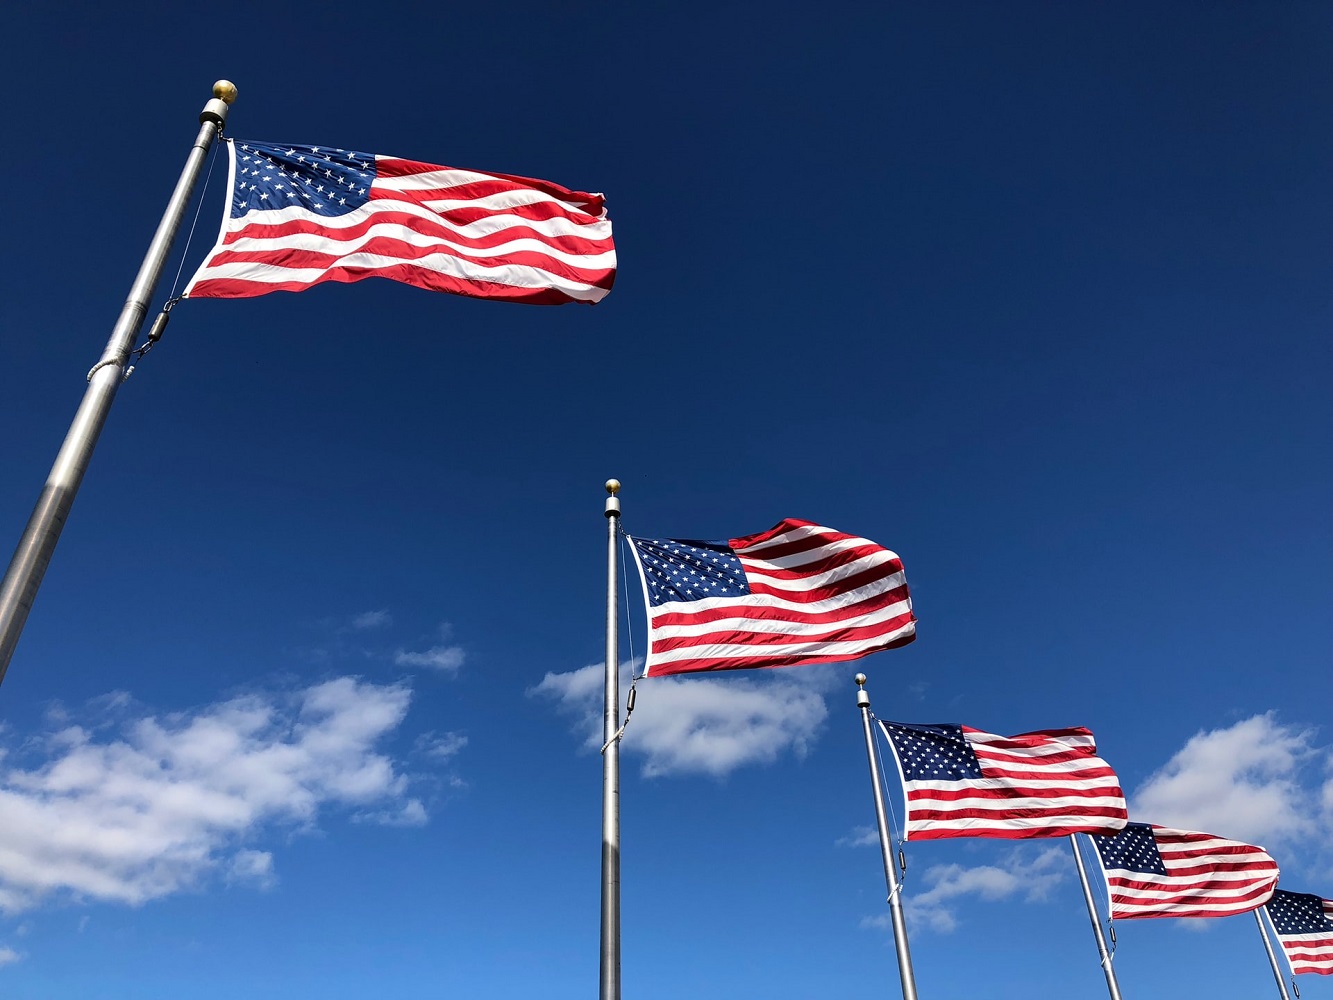 Five American flags in metal poles waving amidst a blue sky with some clouds